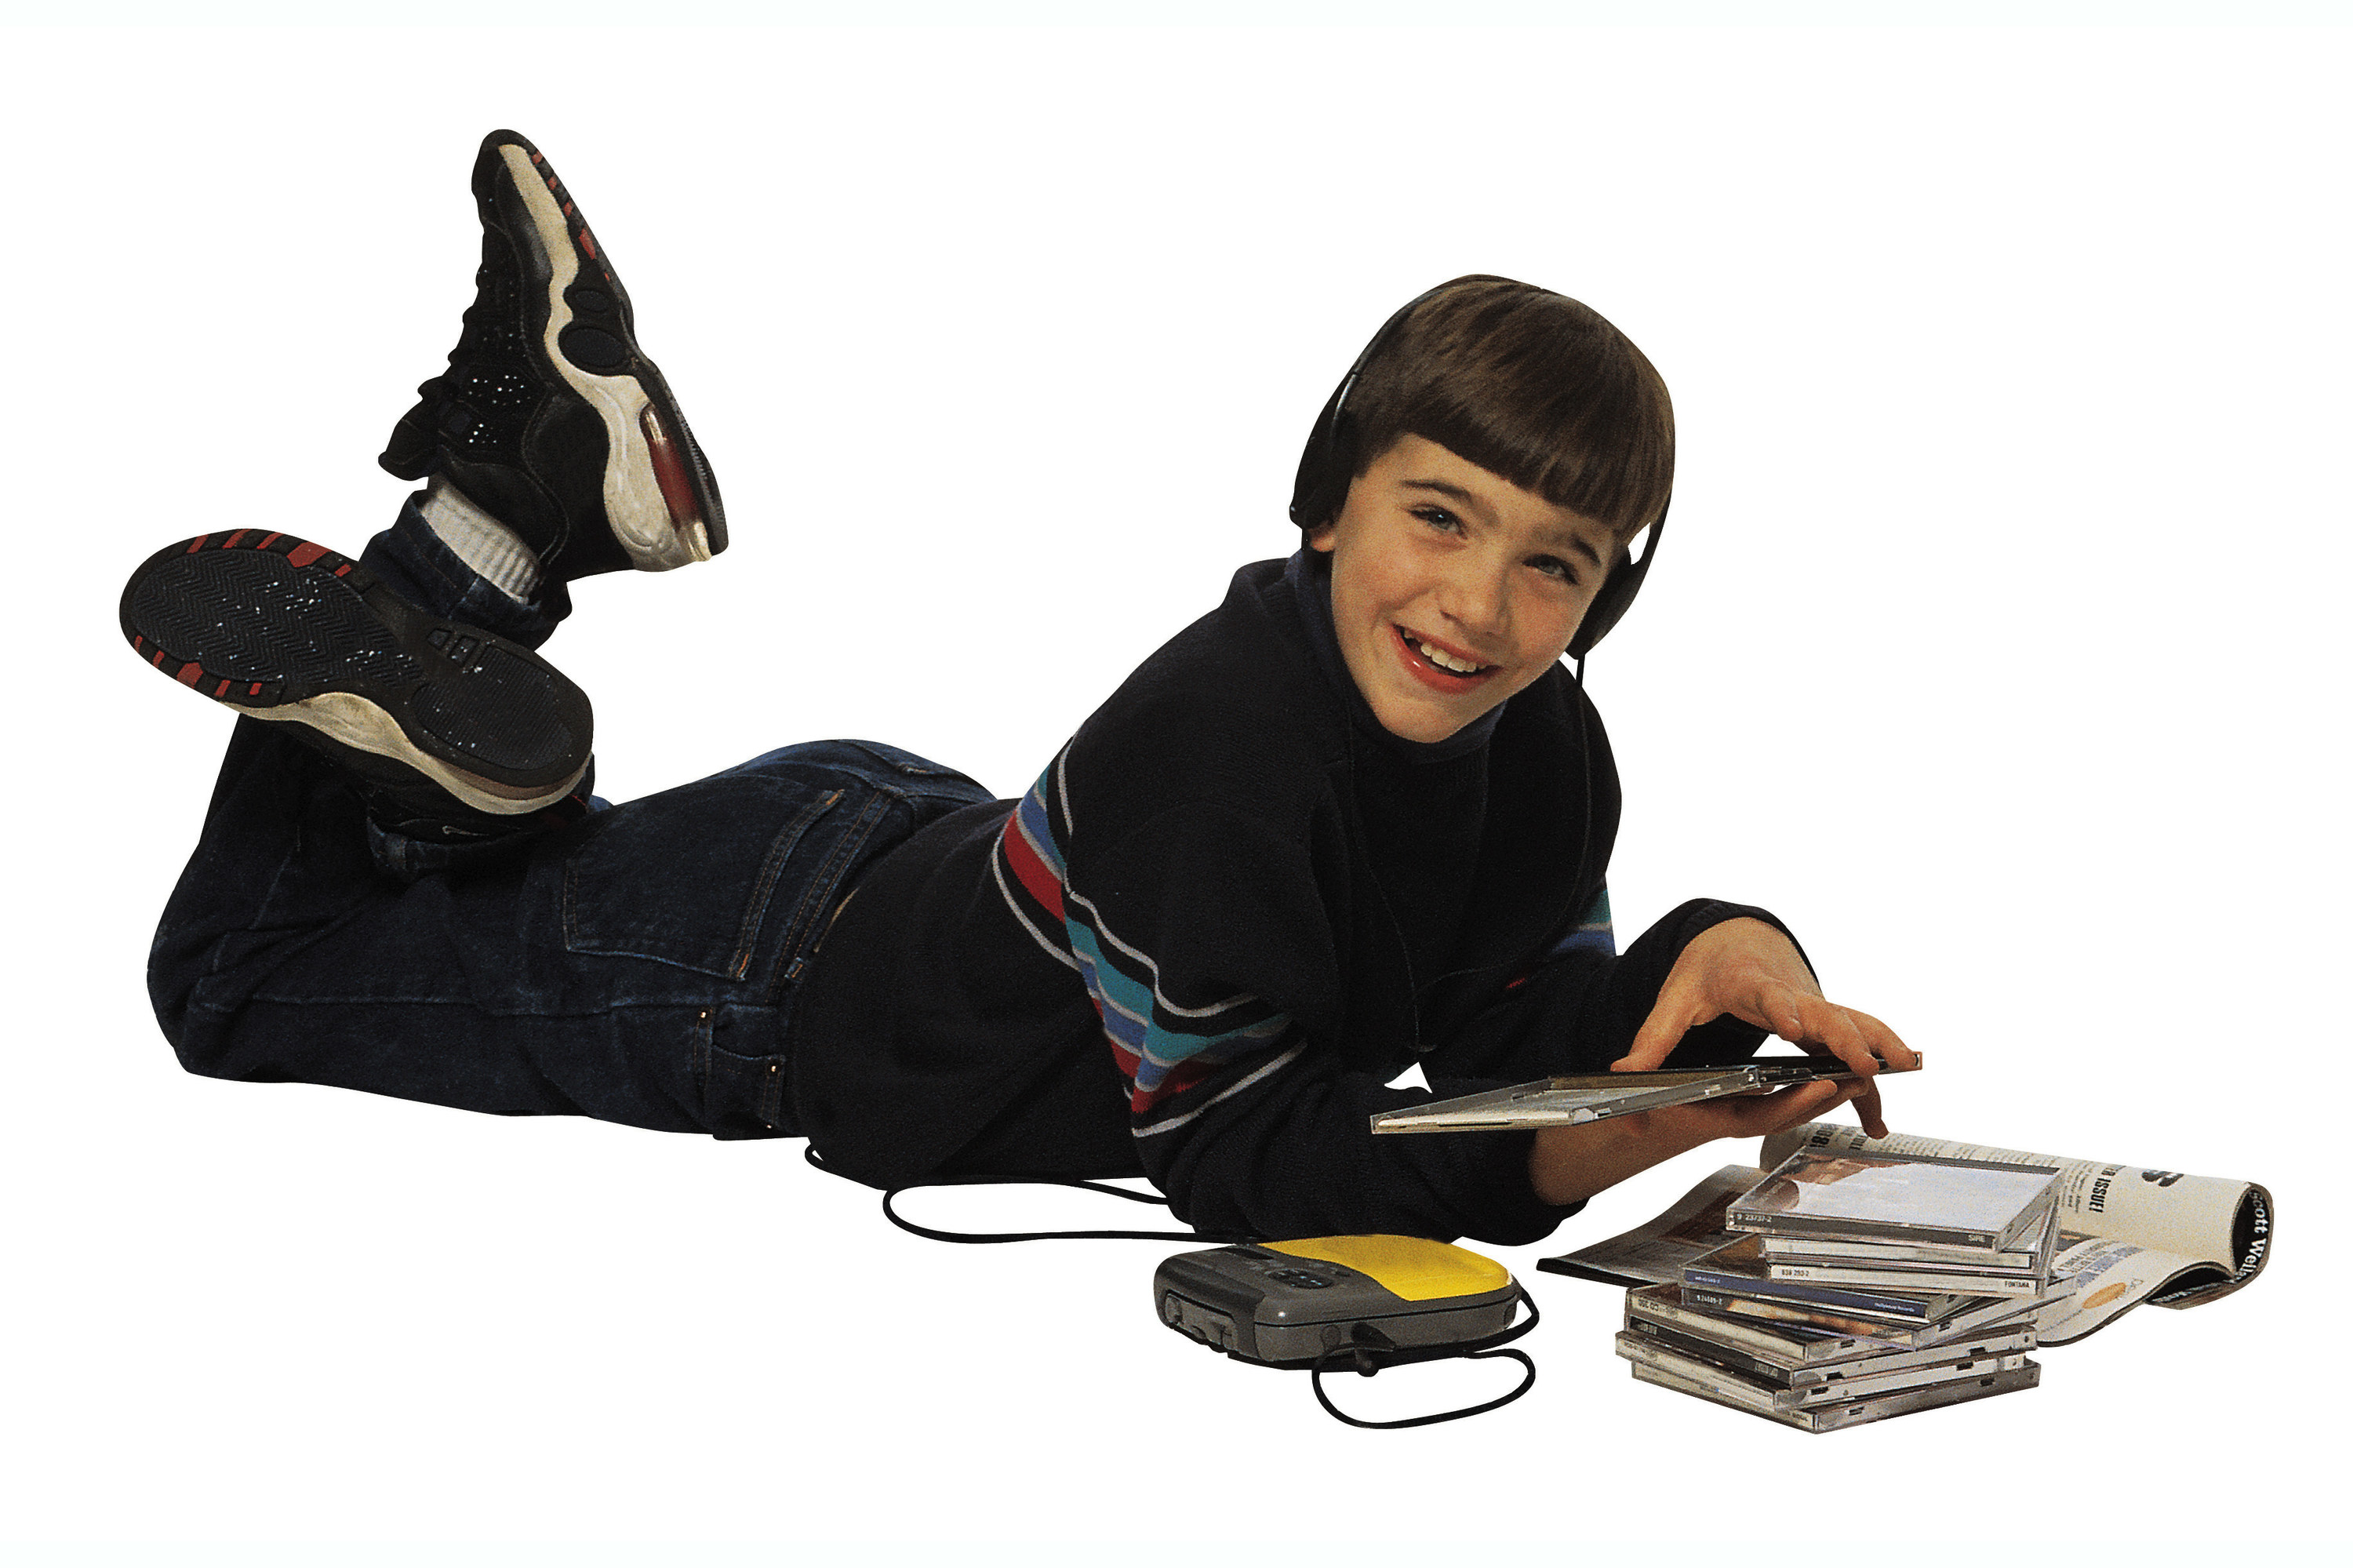 A &#x27;90s kids lying on the floor listening to a CD from his portable CD player while he has a CD case opened in his hand and has a stack of CDs next to him